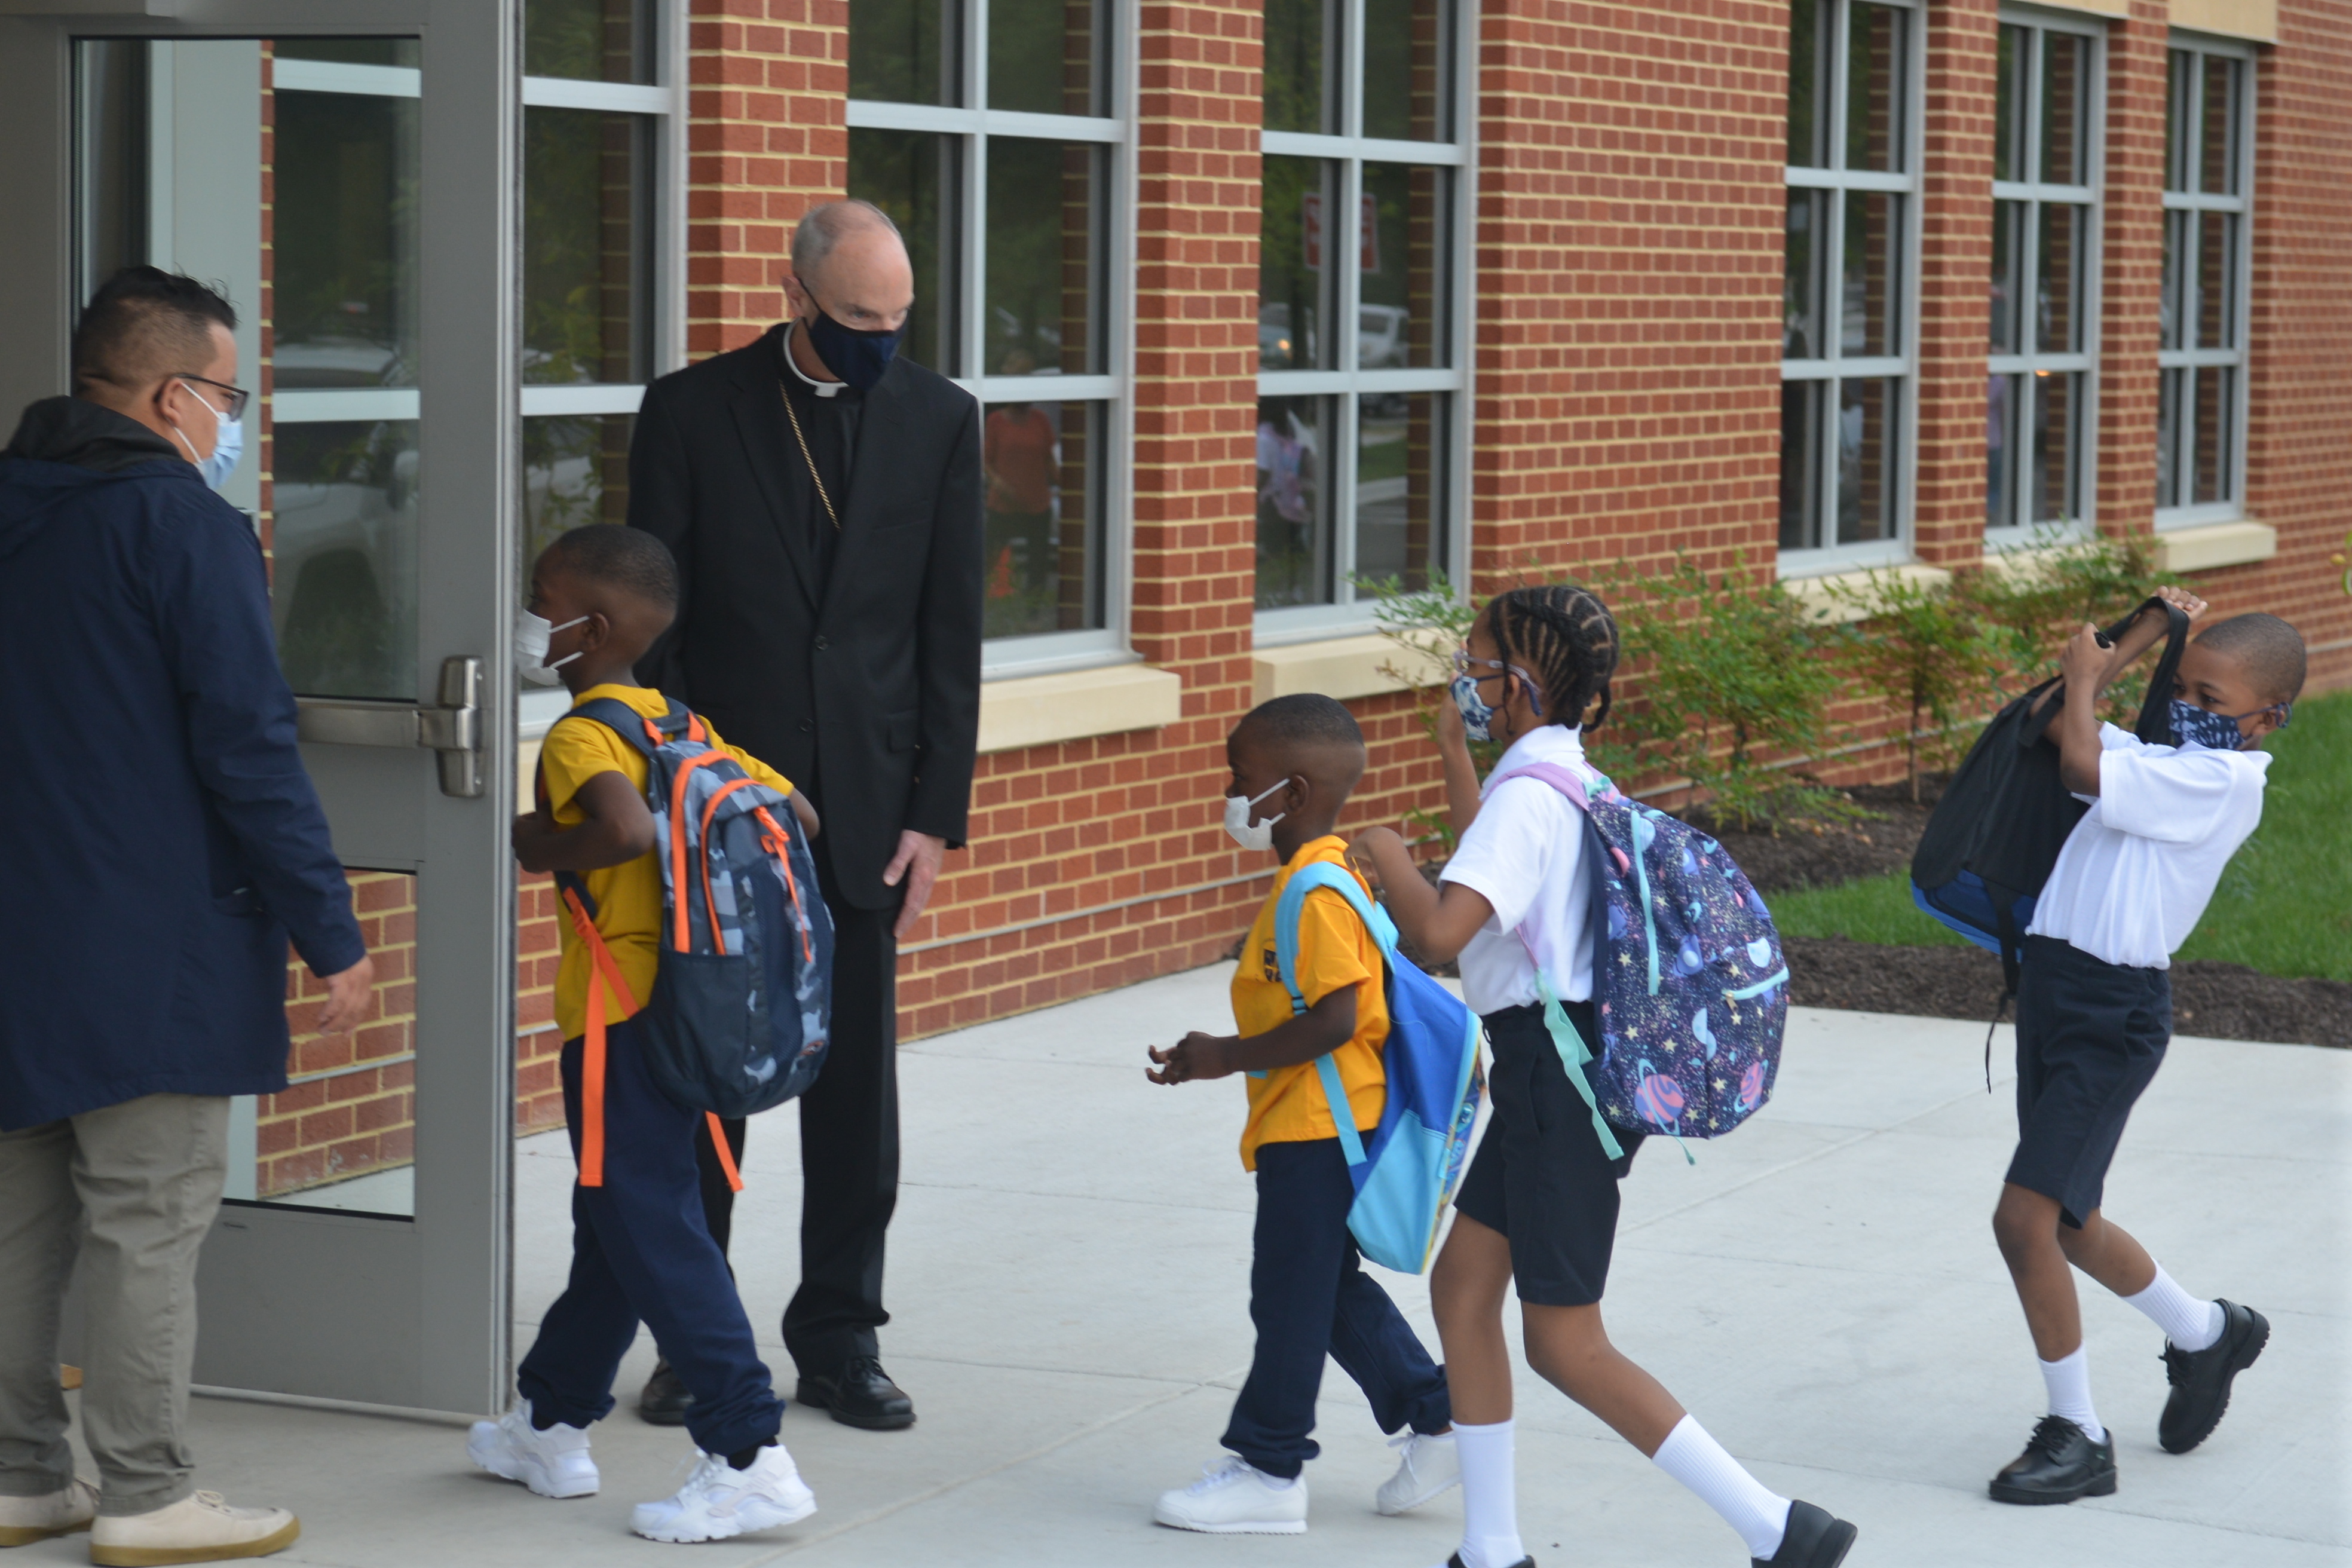 Youngsters enter the first new Catholic school built in Baltimore in roughly 60 years with a mix of enthusiasm and first-day-back jitters, Monday Aug. 30, 2021. (AP Photo/David McFadden)